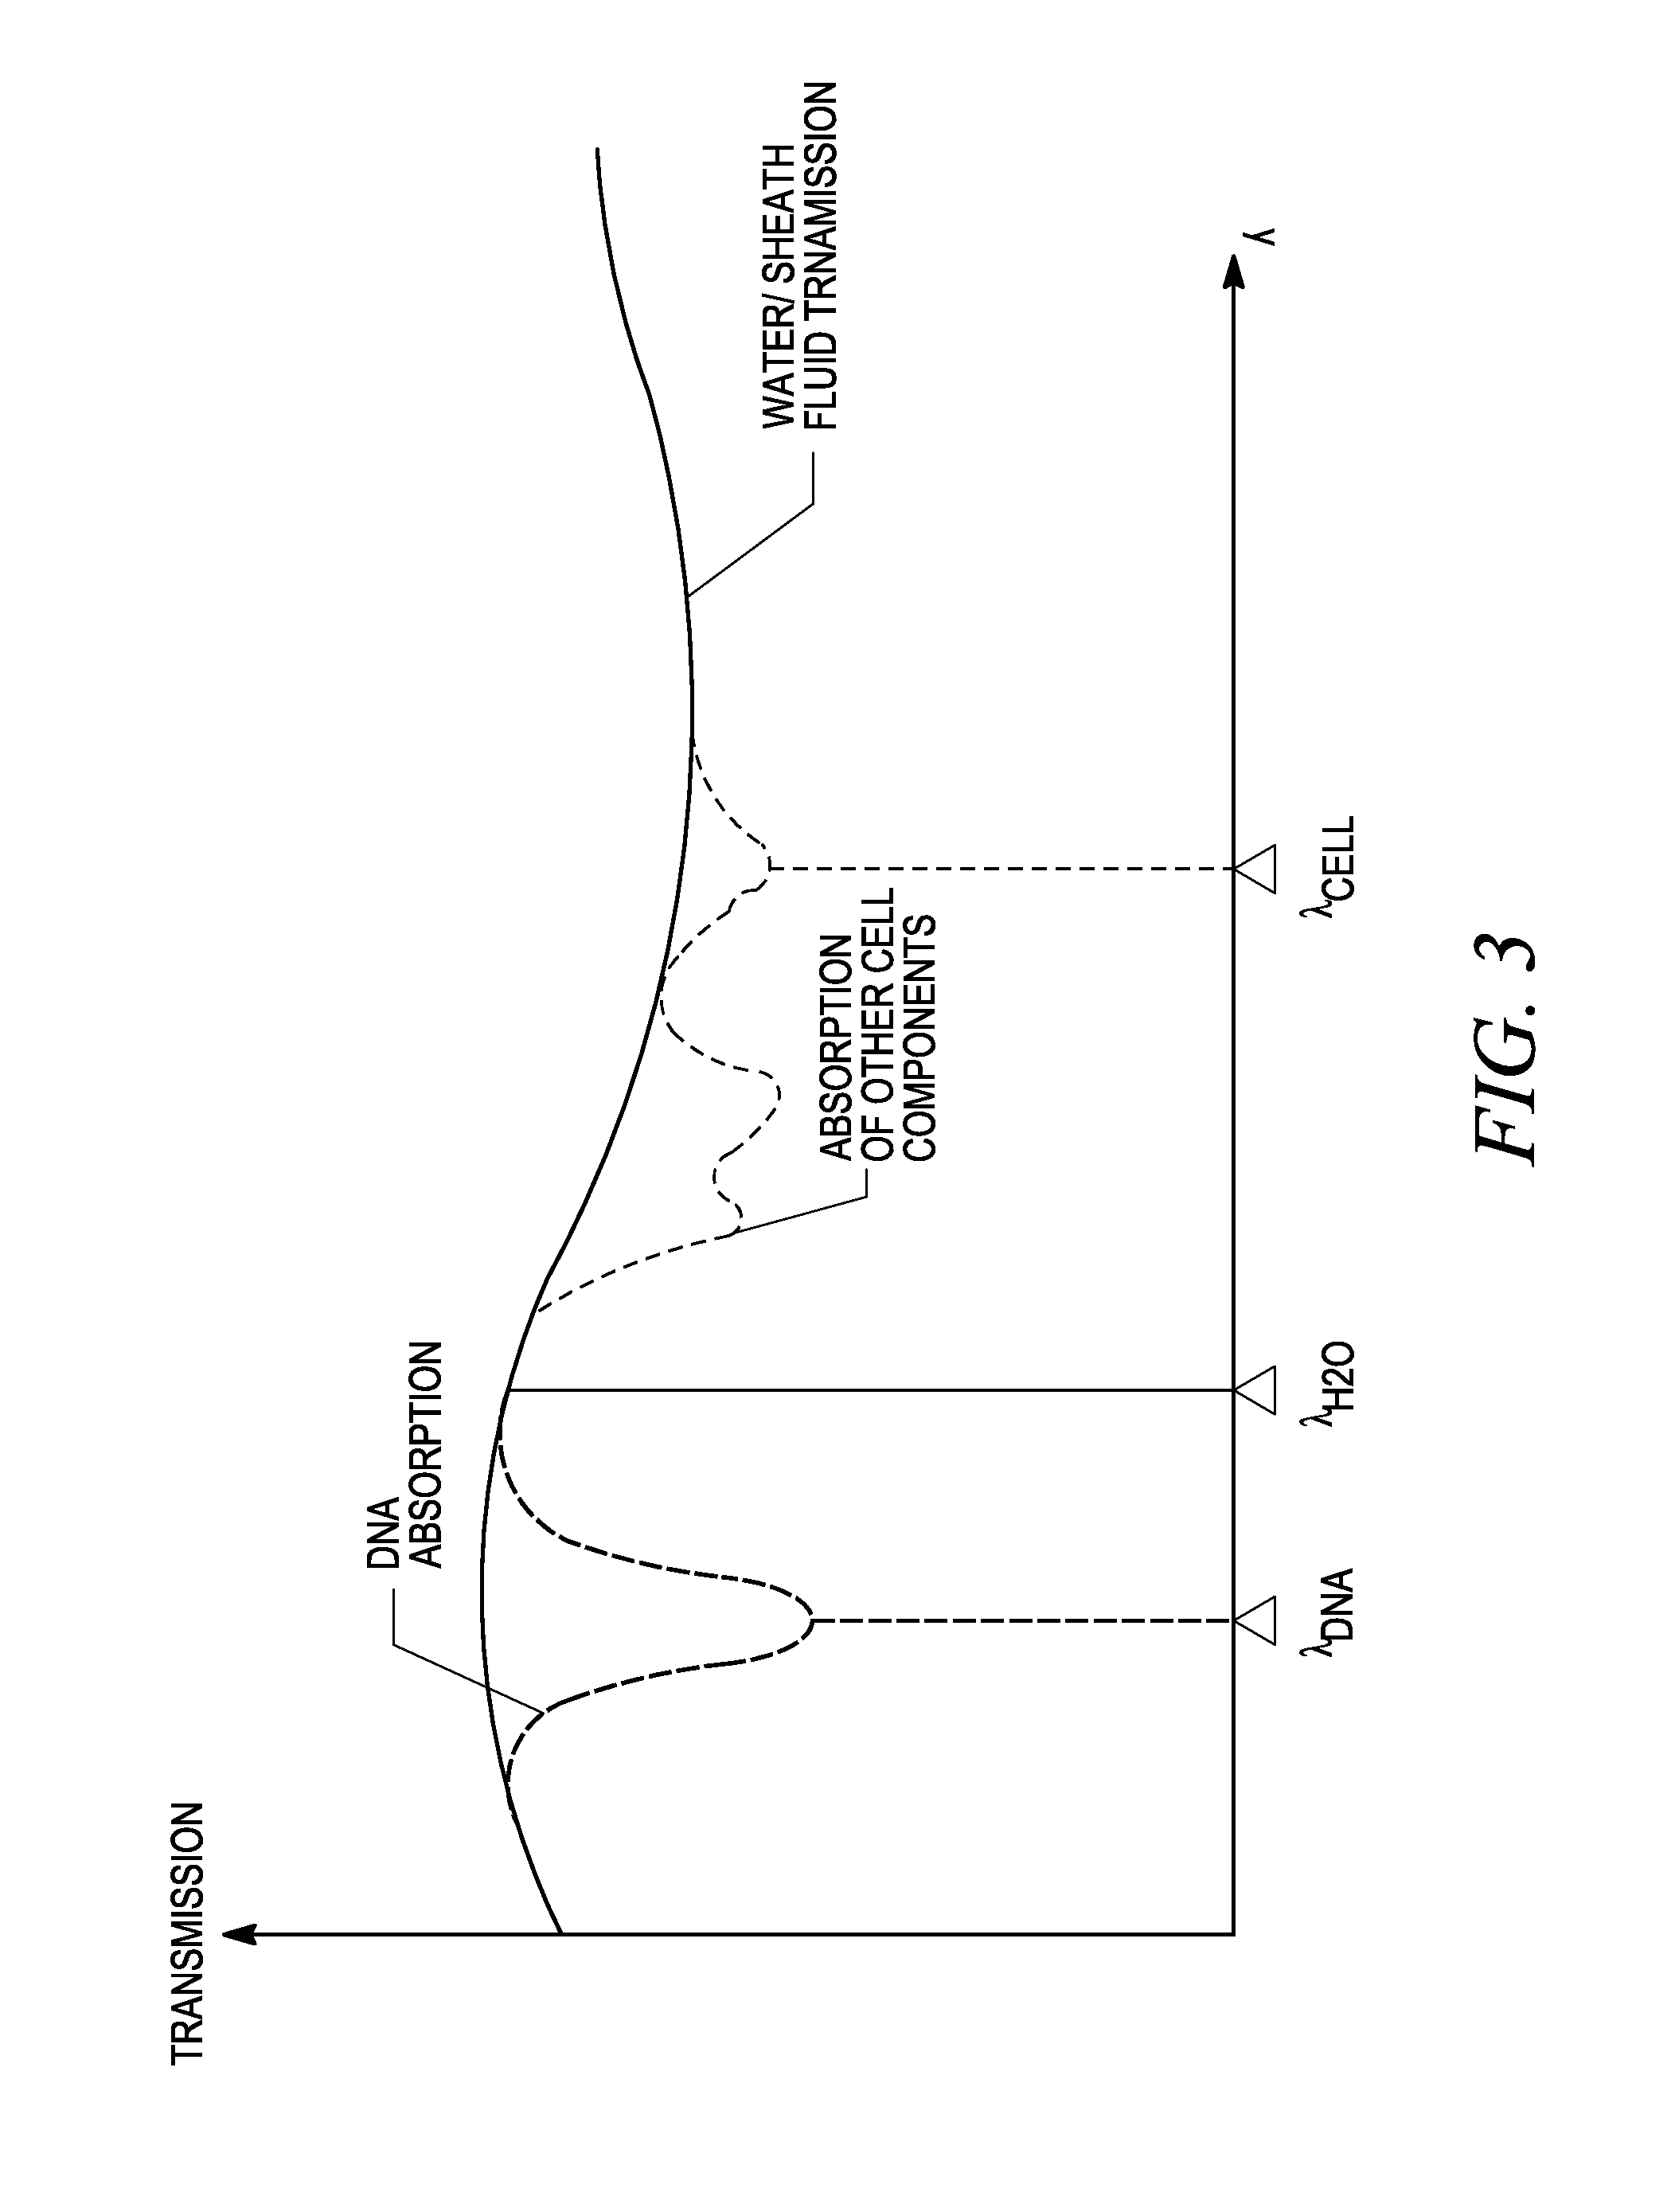 Cytometry system with quantum cascade laser source, acoustic detector, and micro-fluidic cell handling system configured for inspection of individual cells